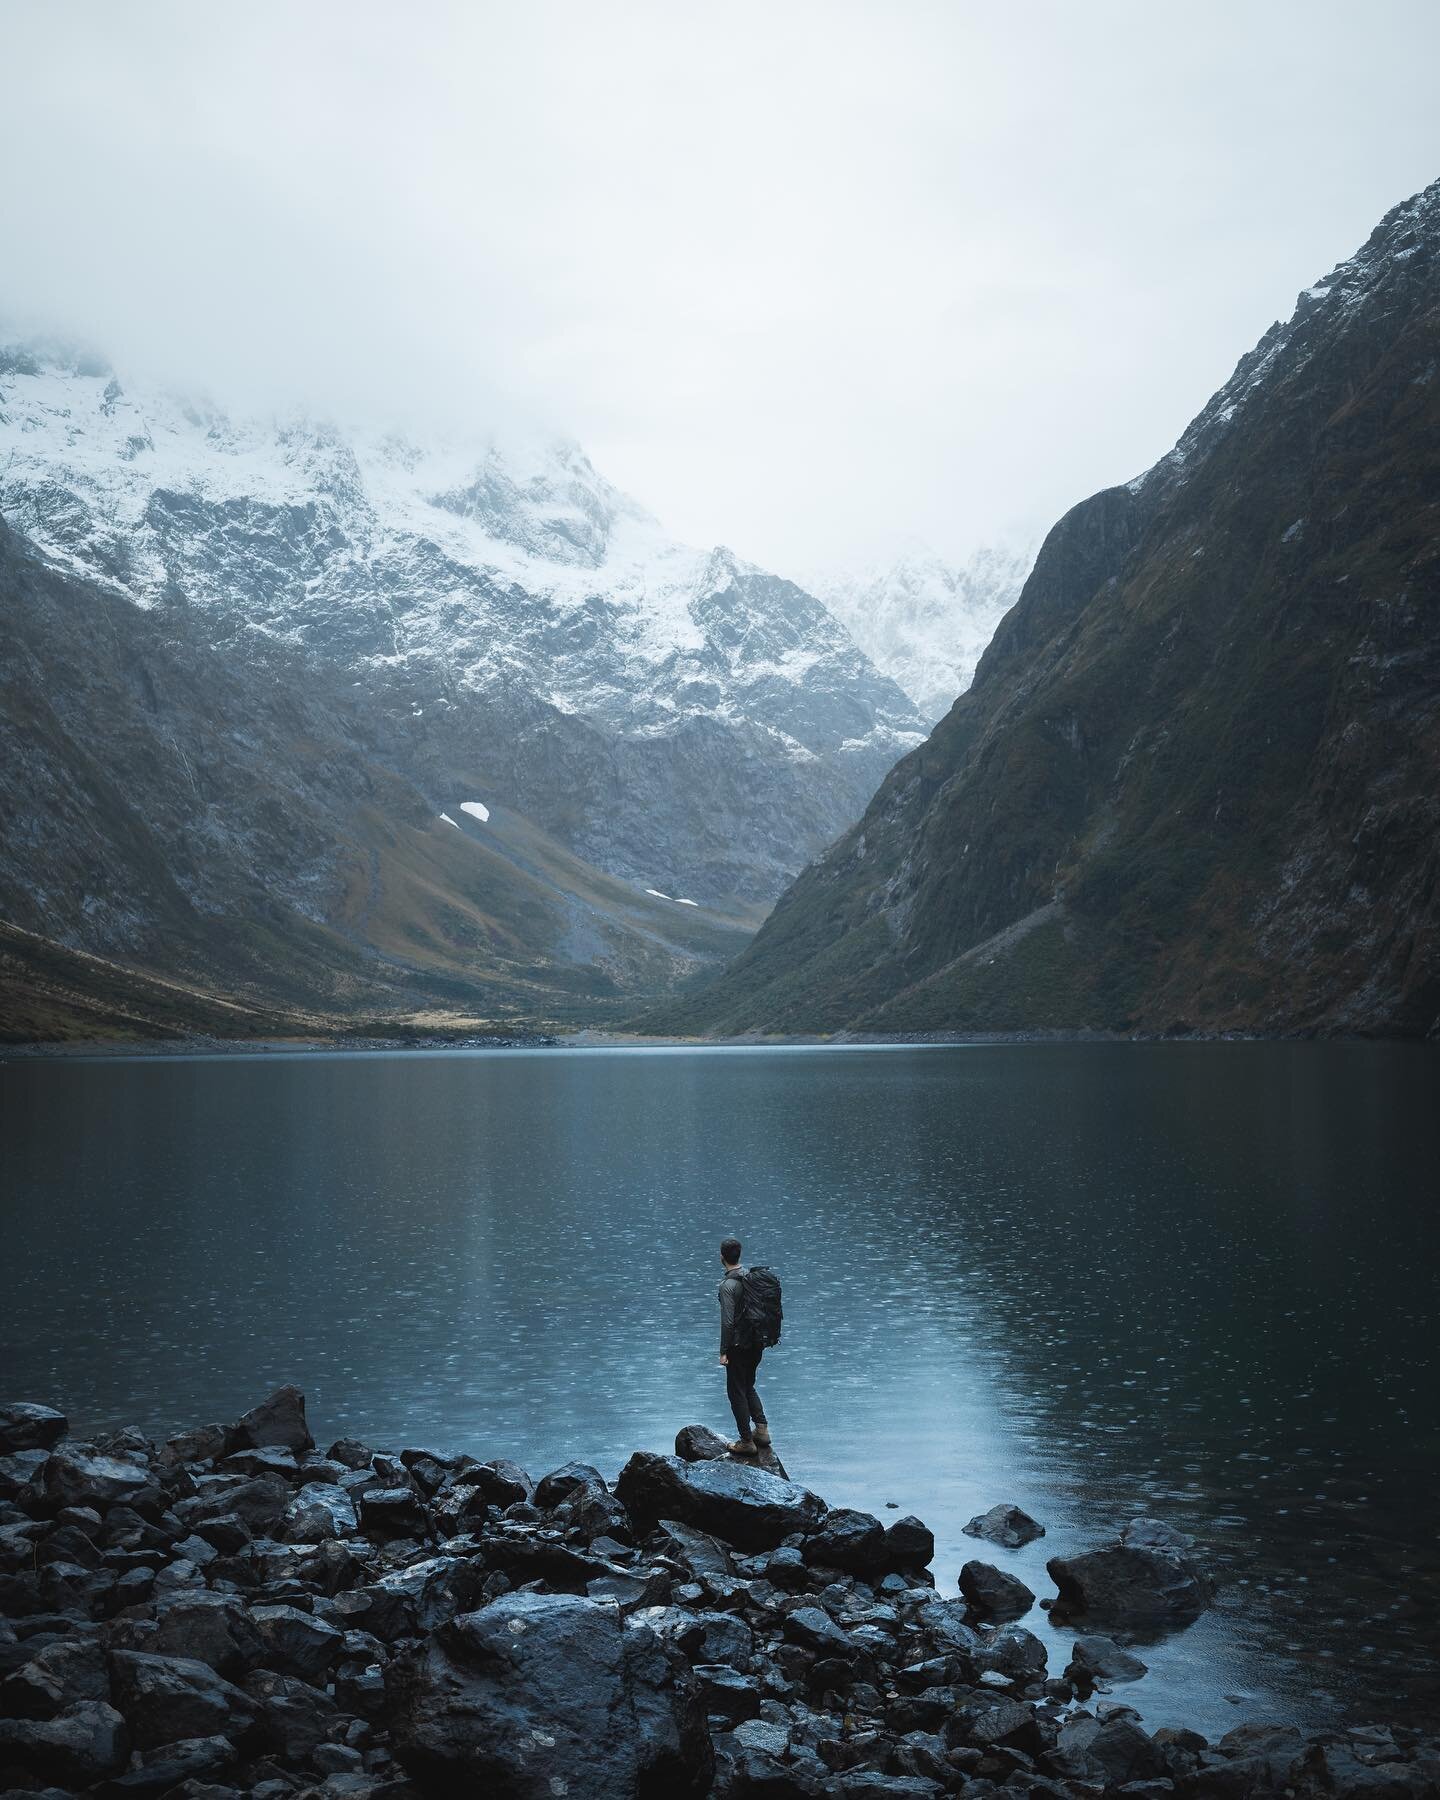 New Zealand Lake Marian. The rain made it the lake soo cool! The 1st pic is one of my favorite photos @currently.hannah took of me. It&rsquo;s crazy to think this lake is 695m high. Empire State Building is 380m tall 🤯 

We were mesmerized by this l